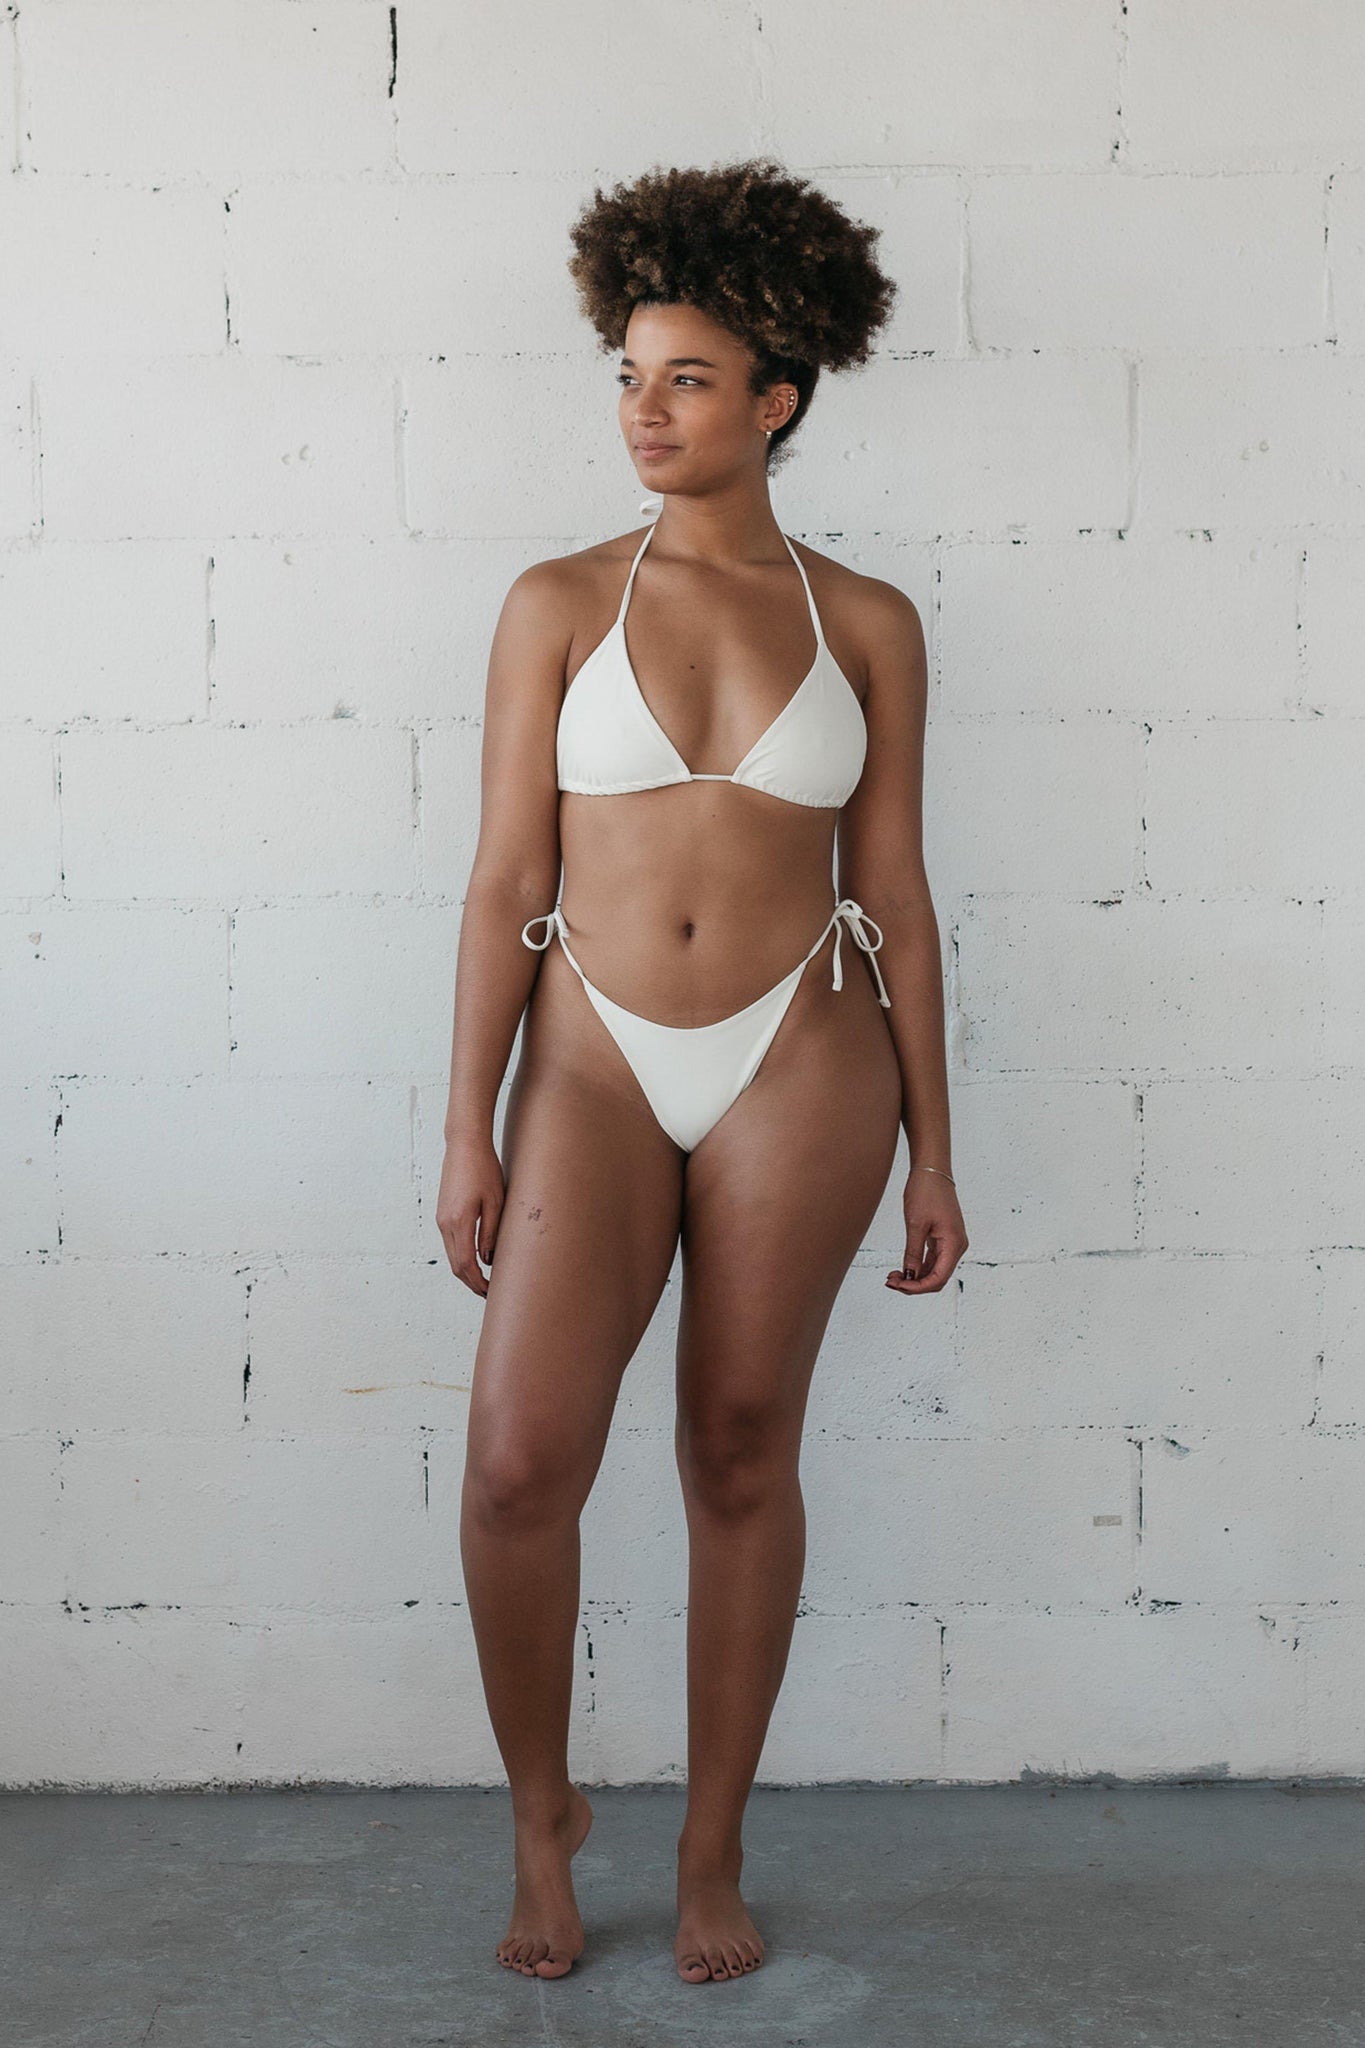 A woman standing with her arms relaxed by her sides wearing white triangle string bikini bottoms with a matching white triangle string bikini top.